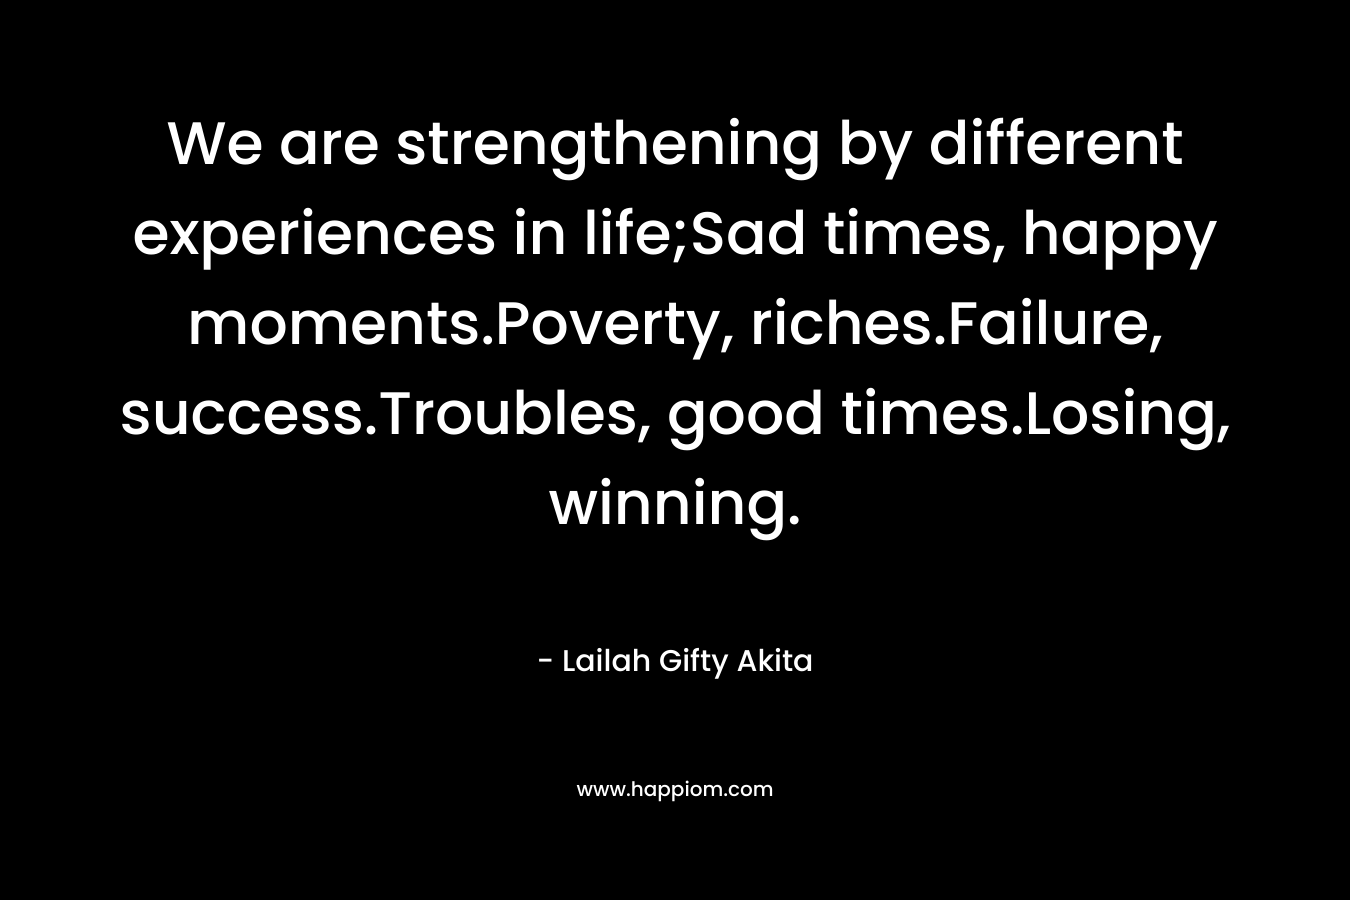 We are strengthening by different experiences in life;Sad times, happy moments.Poverty, riches.Failure, success.Troubles, good times.Losing, winning.